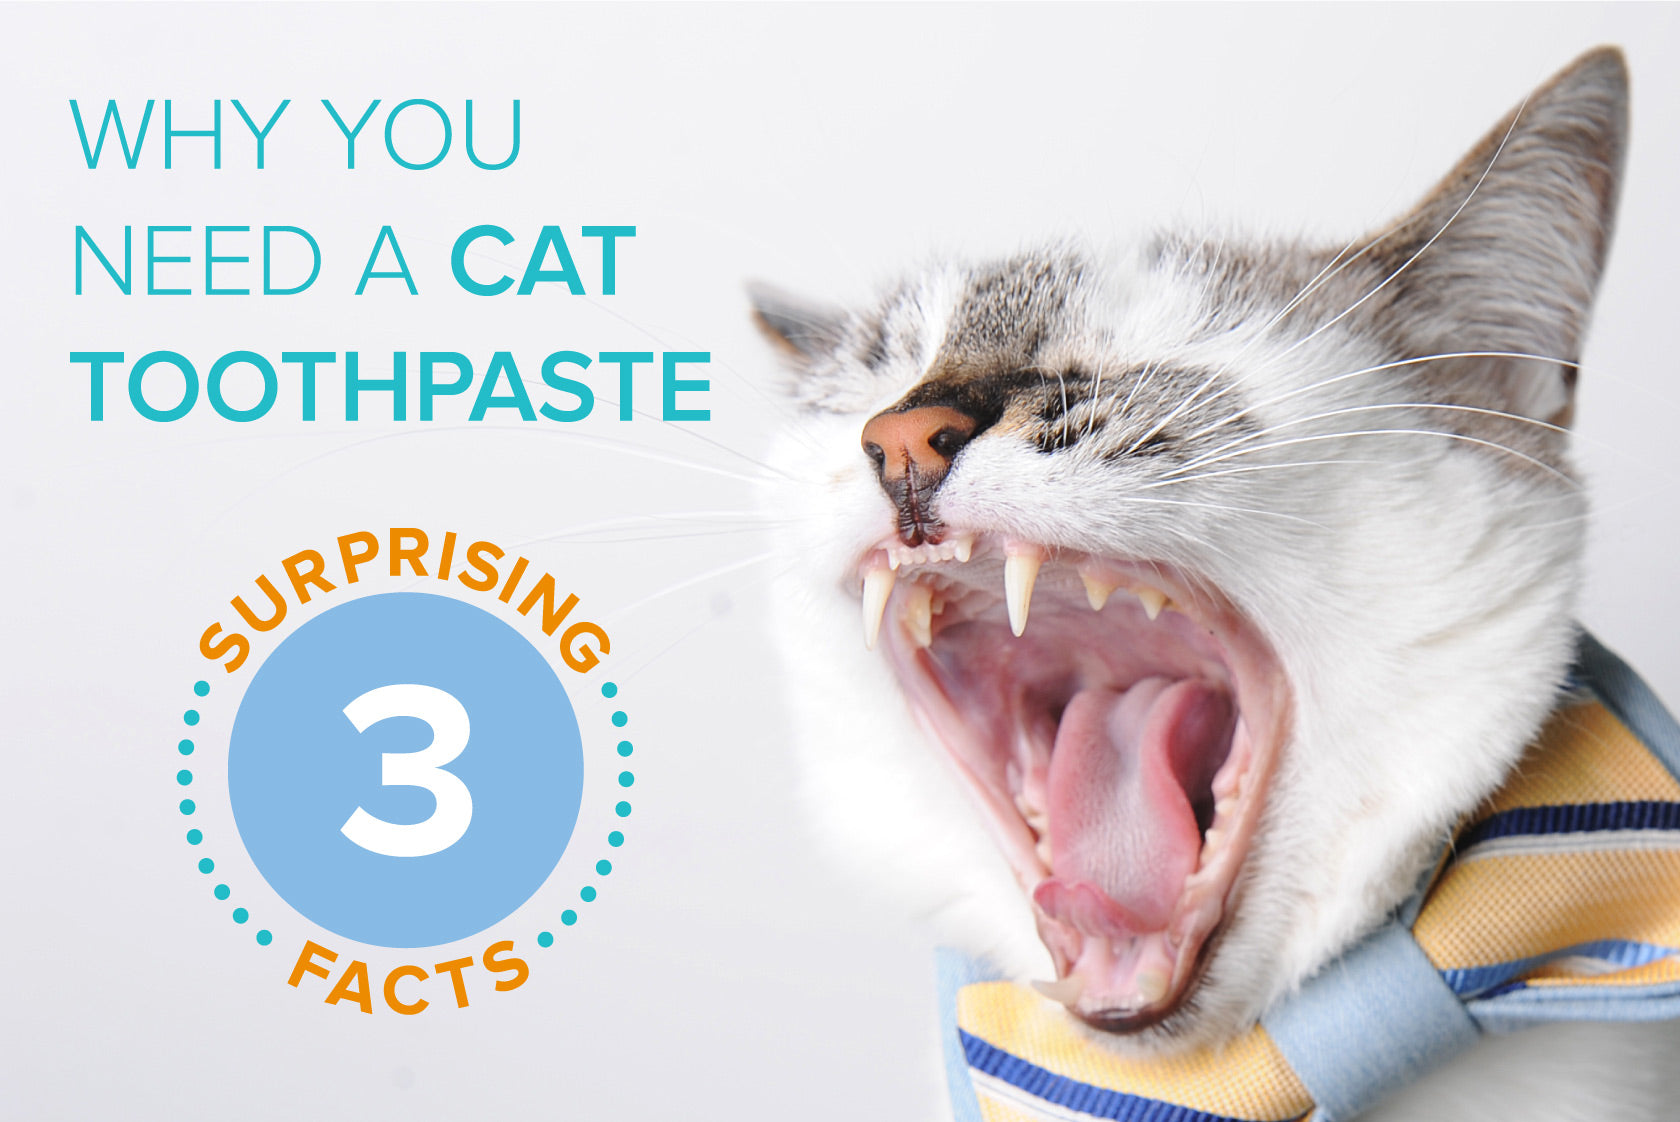 Oxyfresh - Why You Need A Cat Toothpaste Three Surprising Facts